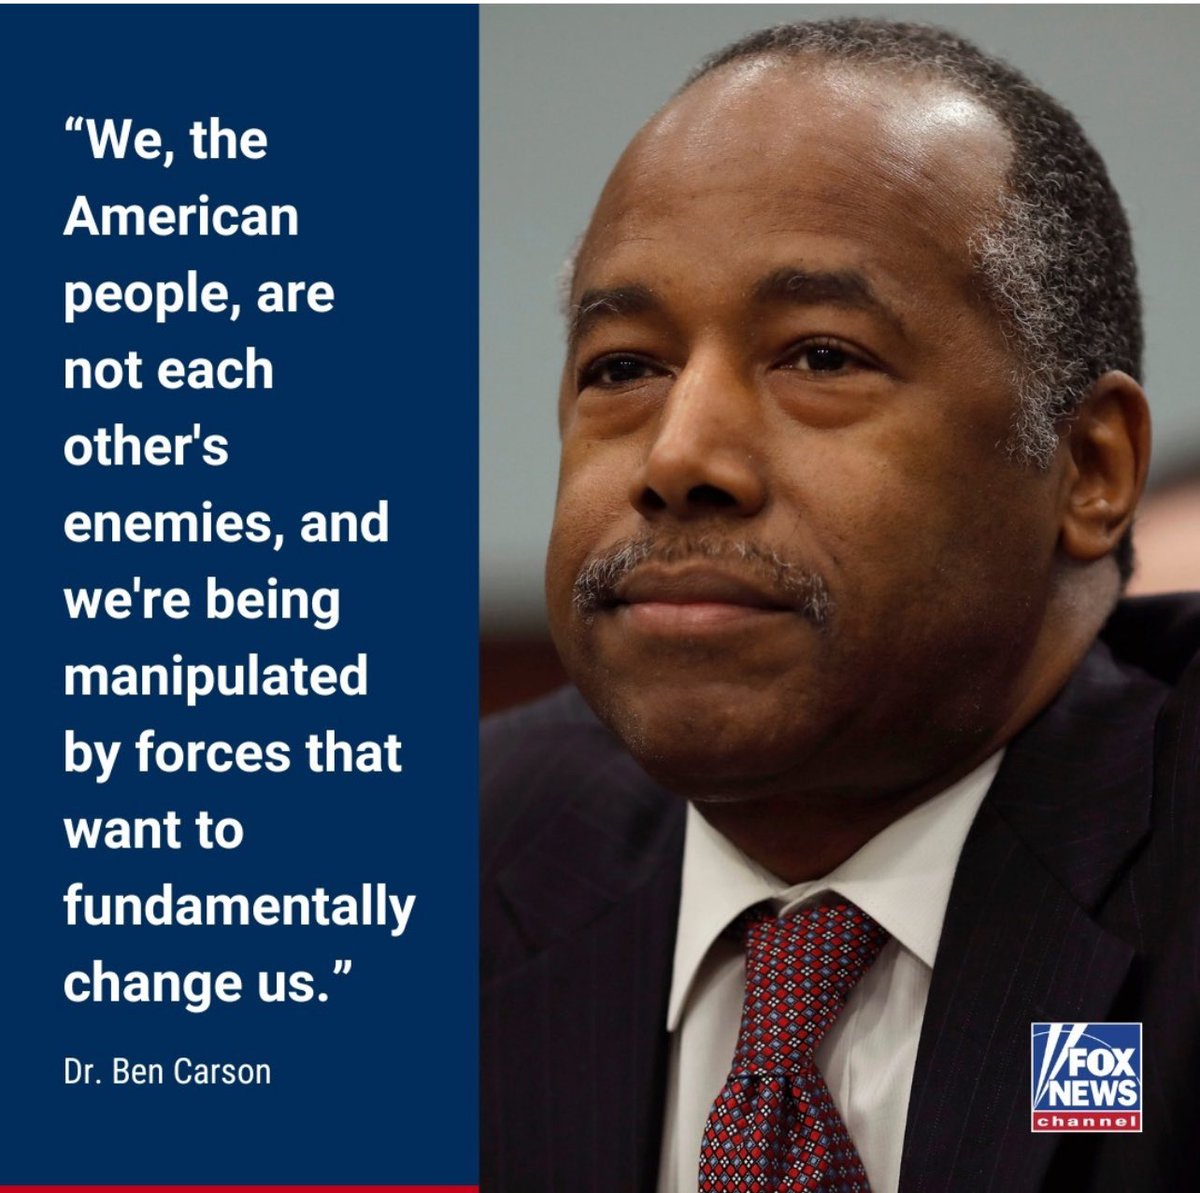 We need to unite not be divided. Do you think Ben Carson would make a great VP for Trump?